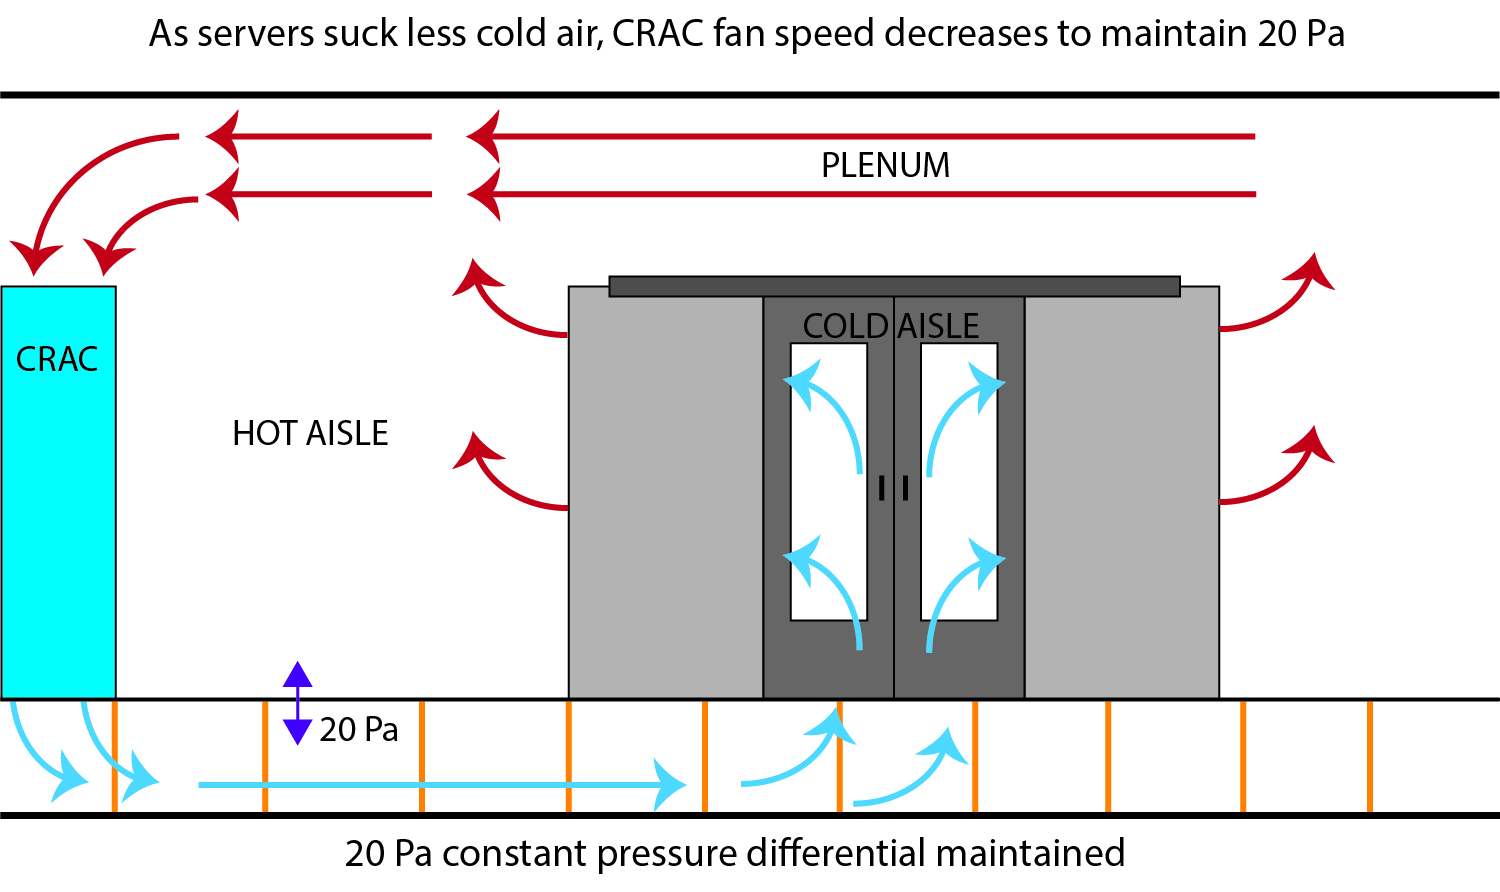 cold aisle decreased cooling capacity